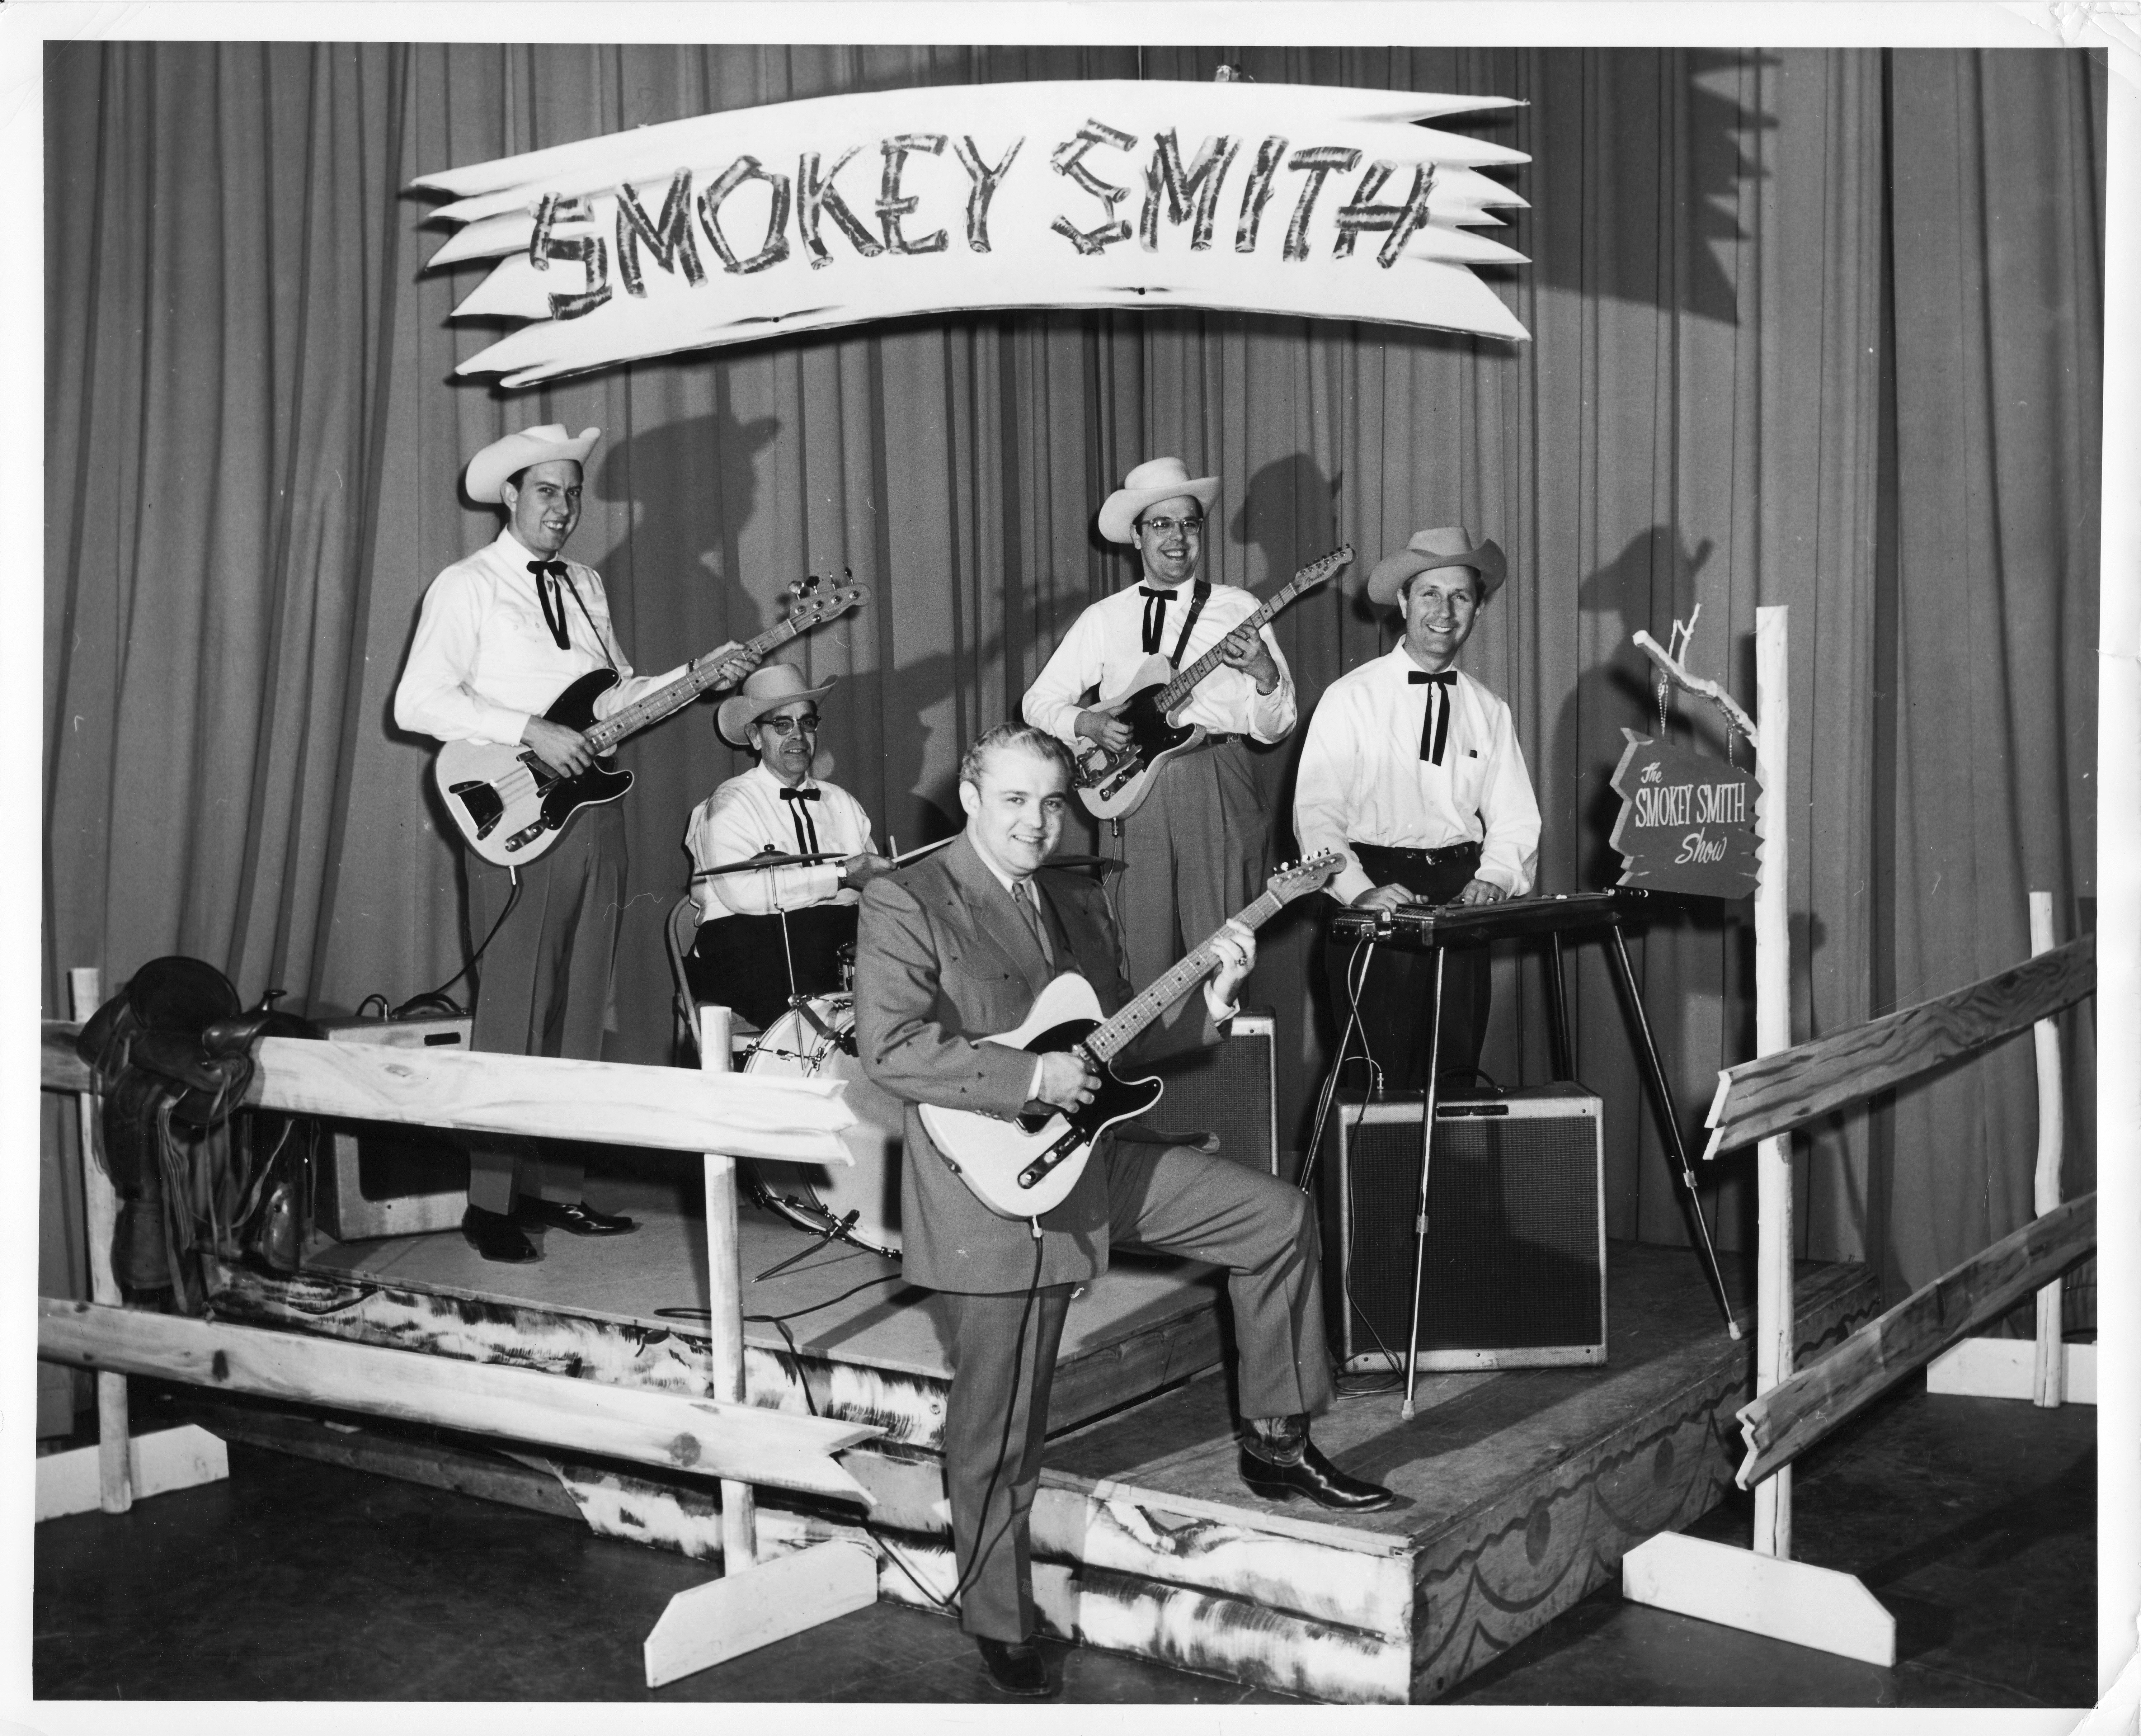 “The Smokey Smith Show” was the first live country music show broadcast in primetime in Iowa in 1955. Photo courtesy of Snowflake Enterprises